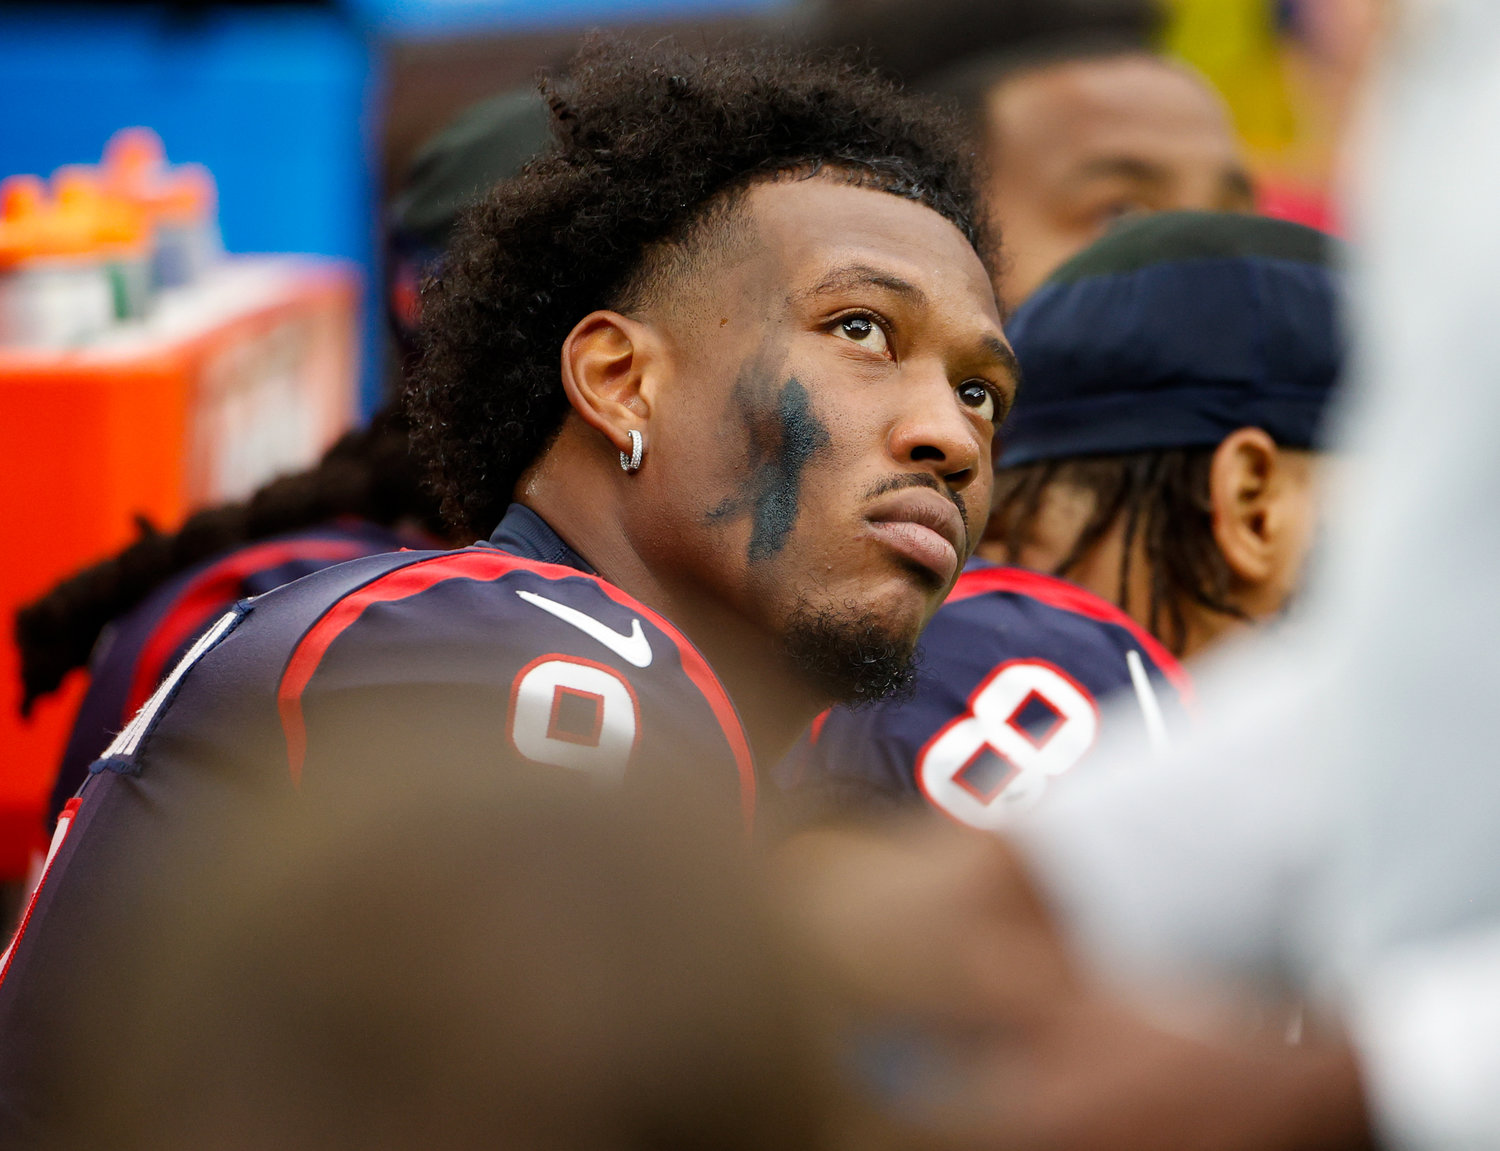 Texans tight end Brevin Jordan (9) on the bench during an NFL game between the Houston Texans and the Jacksonville Jaguars on Jan. 1, 2023 in Houston. The Jaguars won, 31-3.